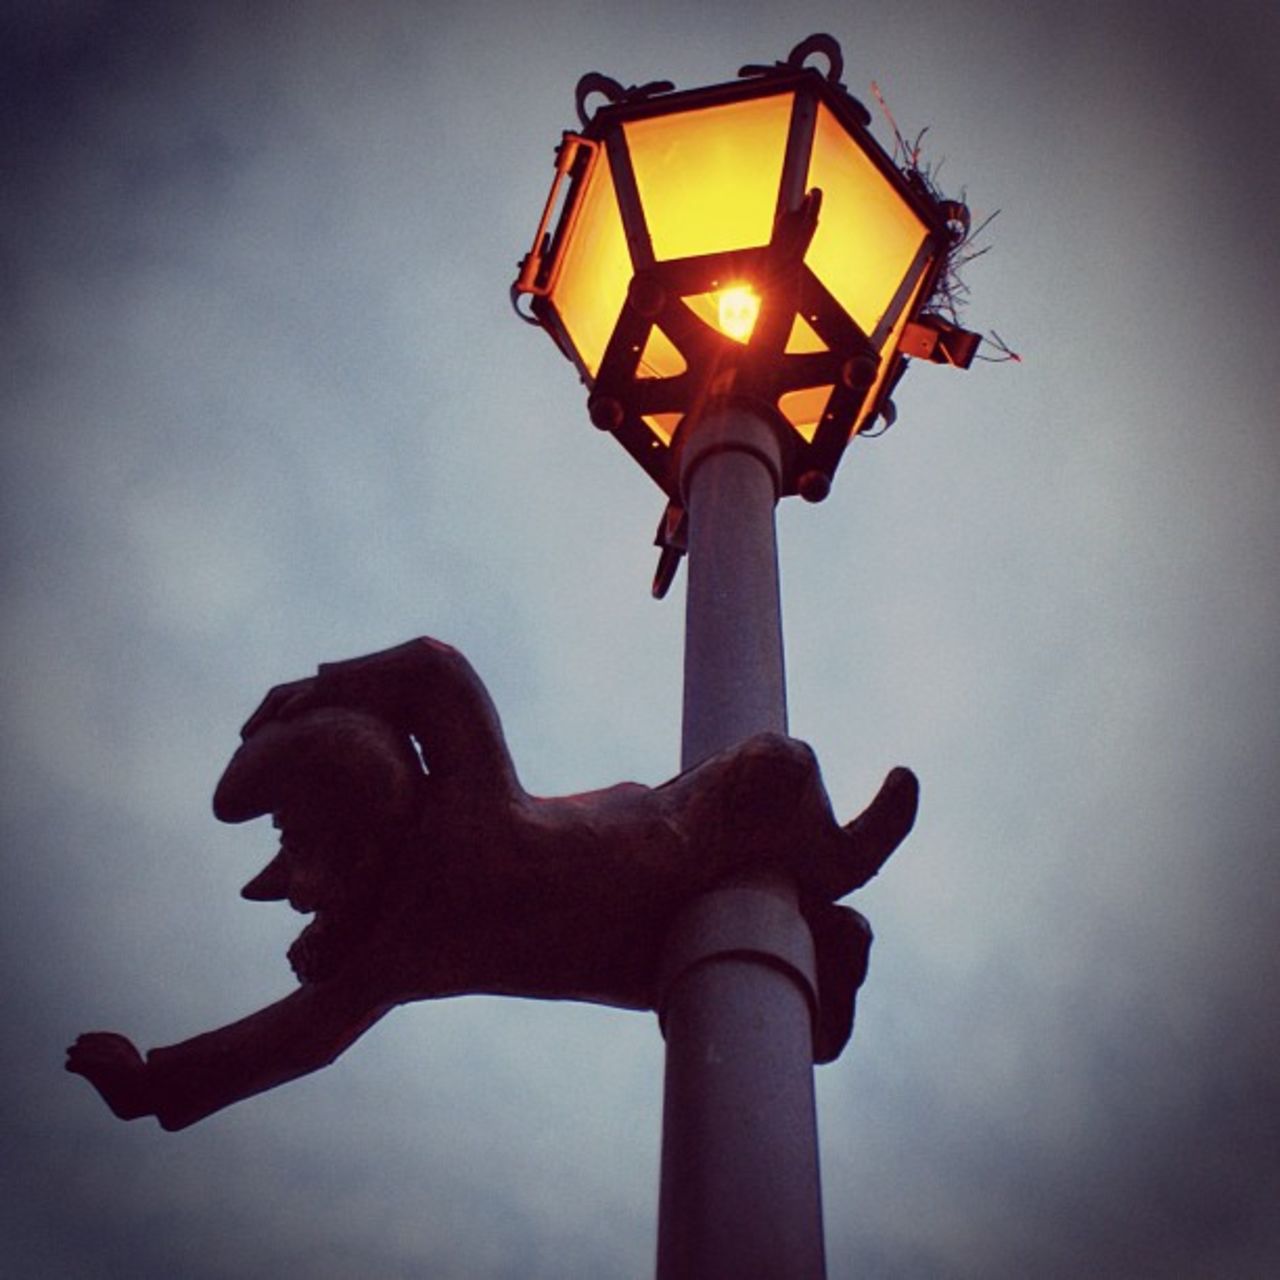 An ornamental gnome clings to a lamppost. Wroclaw is famed for the tiny statues that can be found dotted across the city, often in unusual locations.